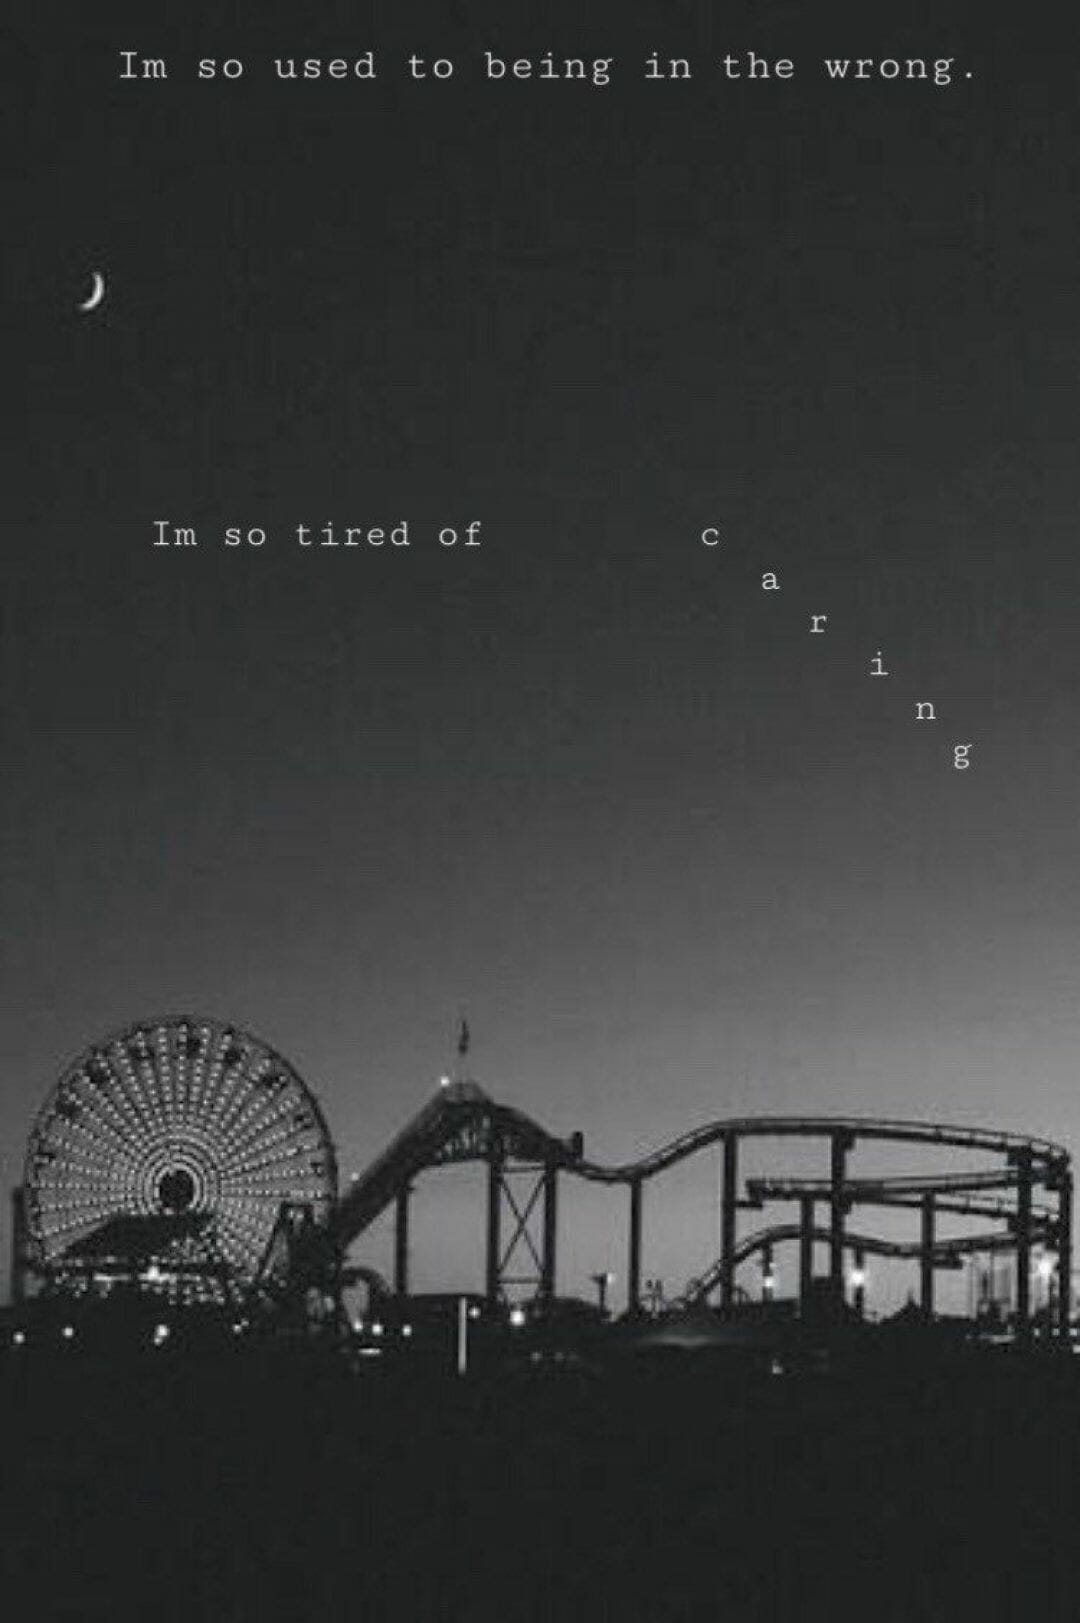 The image of a carnival at night with an ocean view - Gray, black quotes